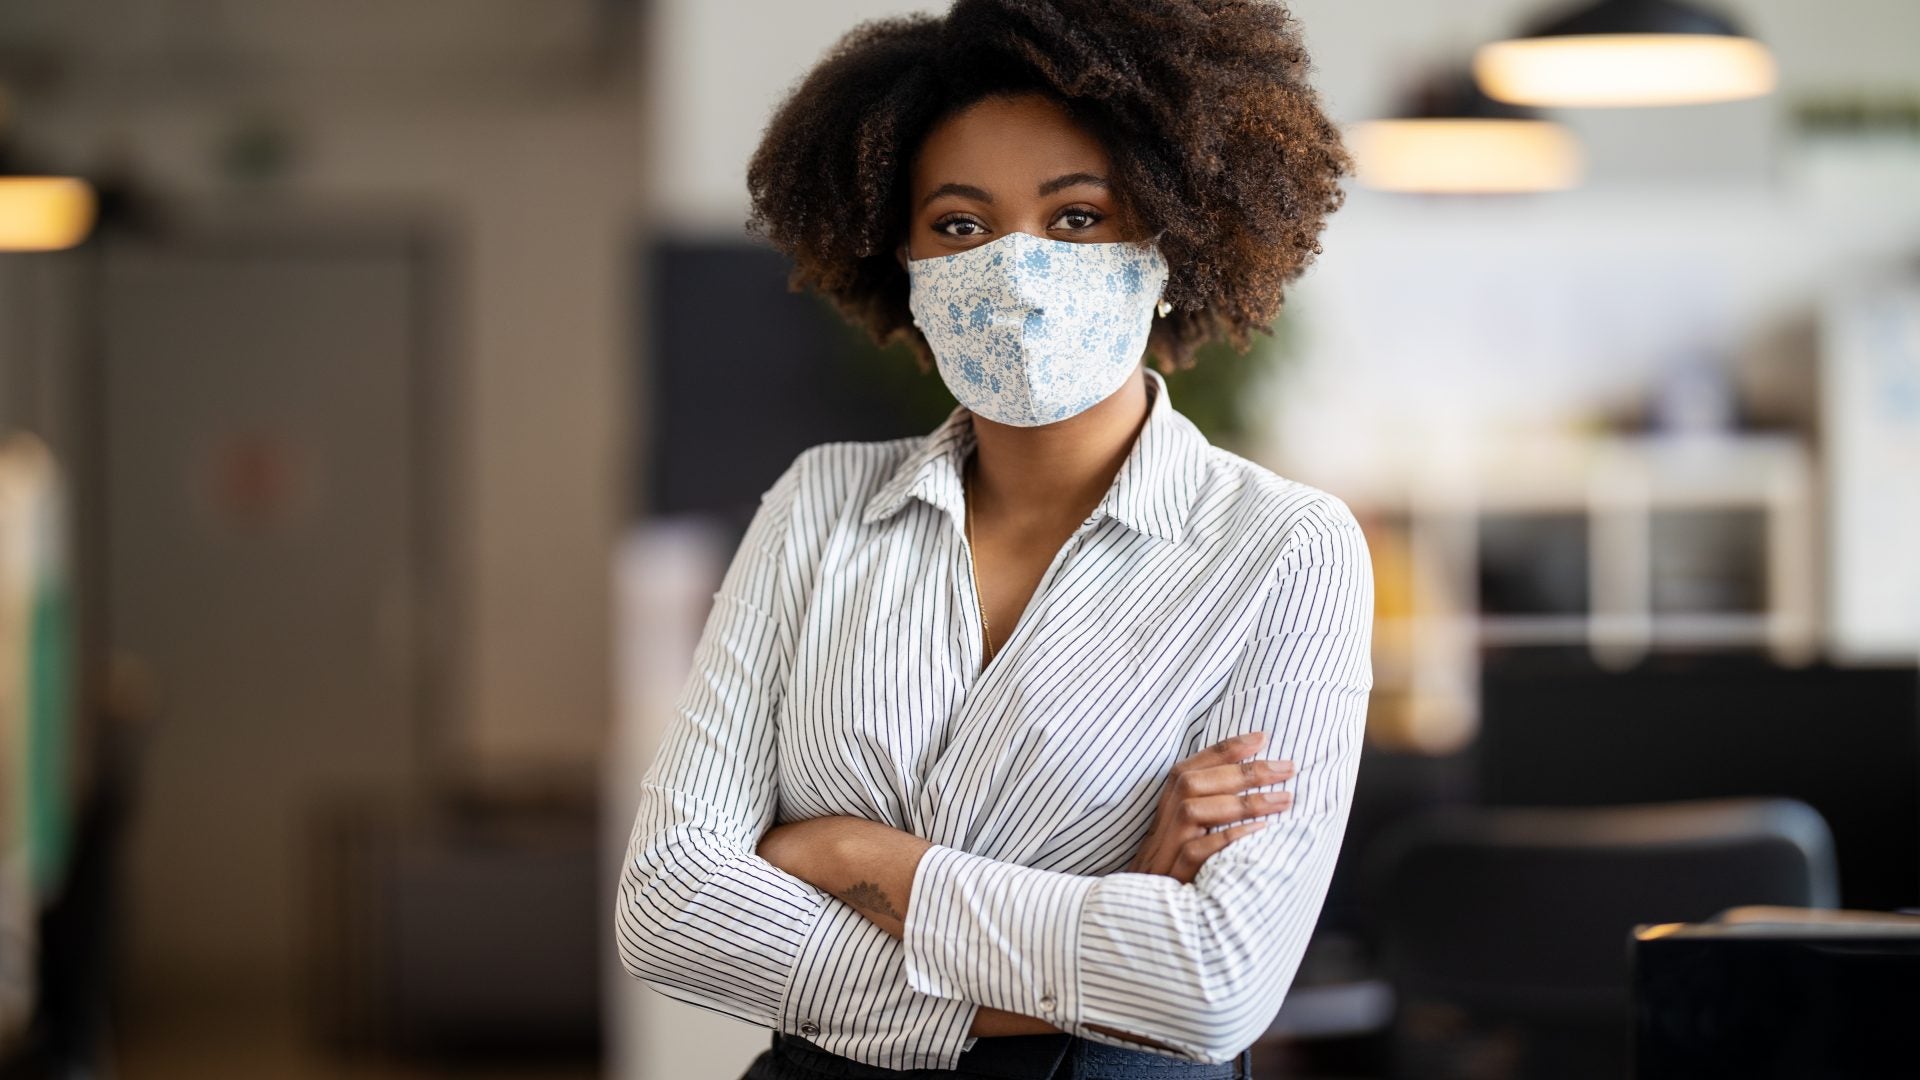 Why I Started a Business During Quarantine